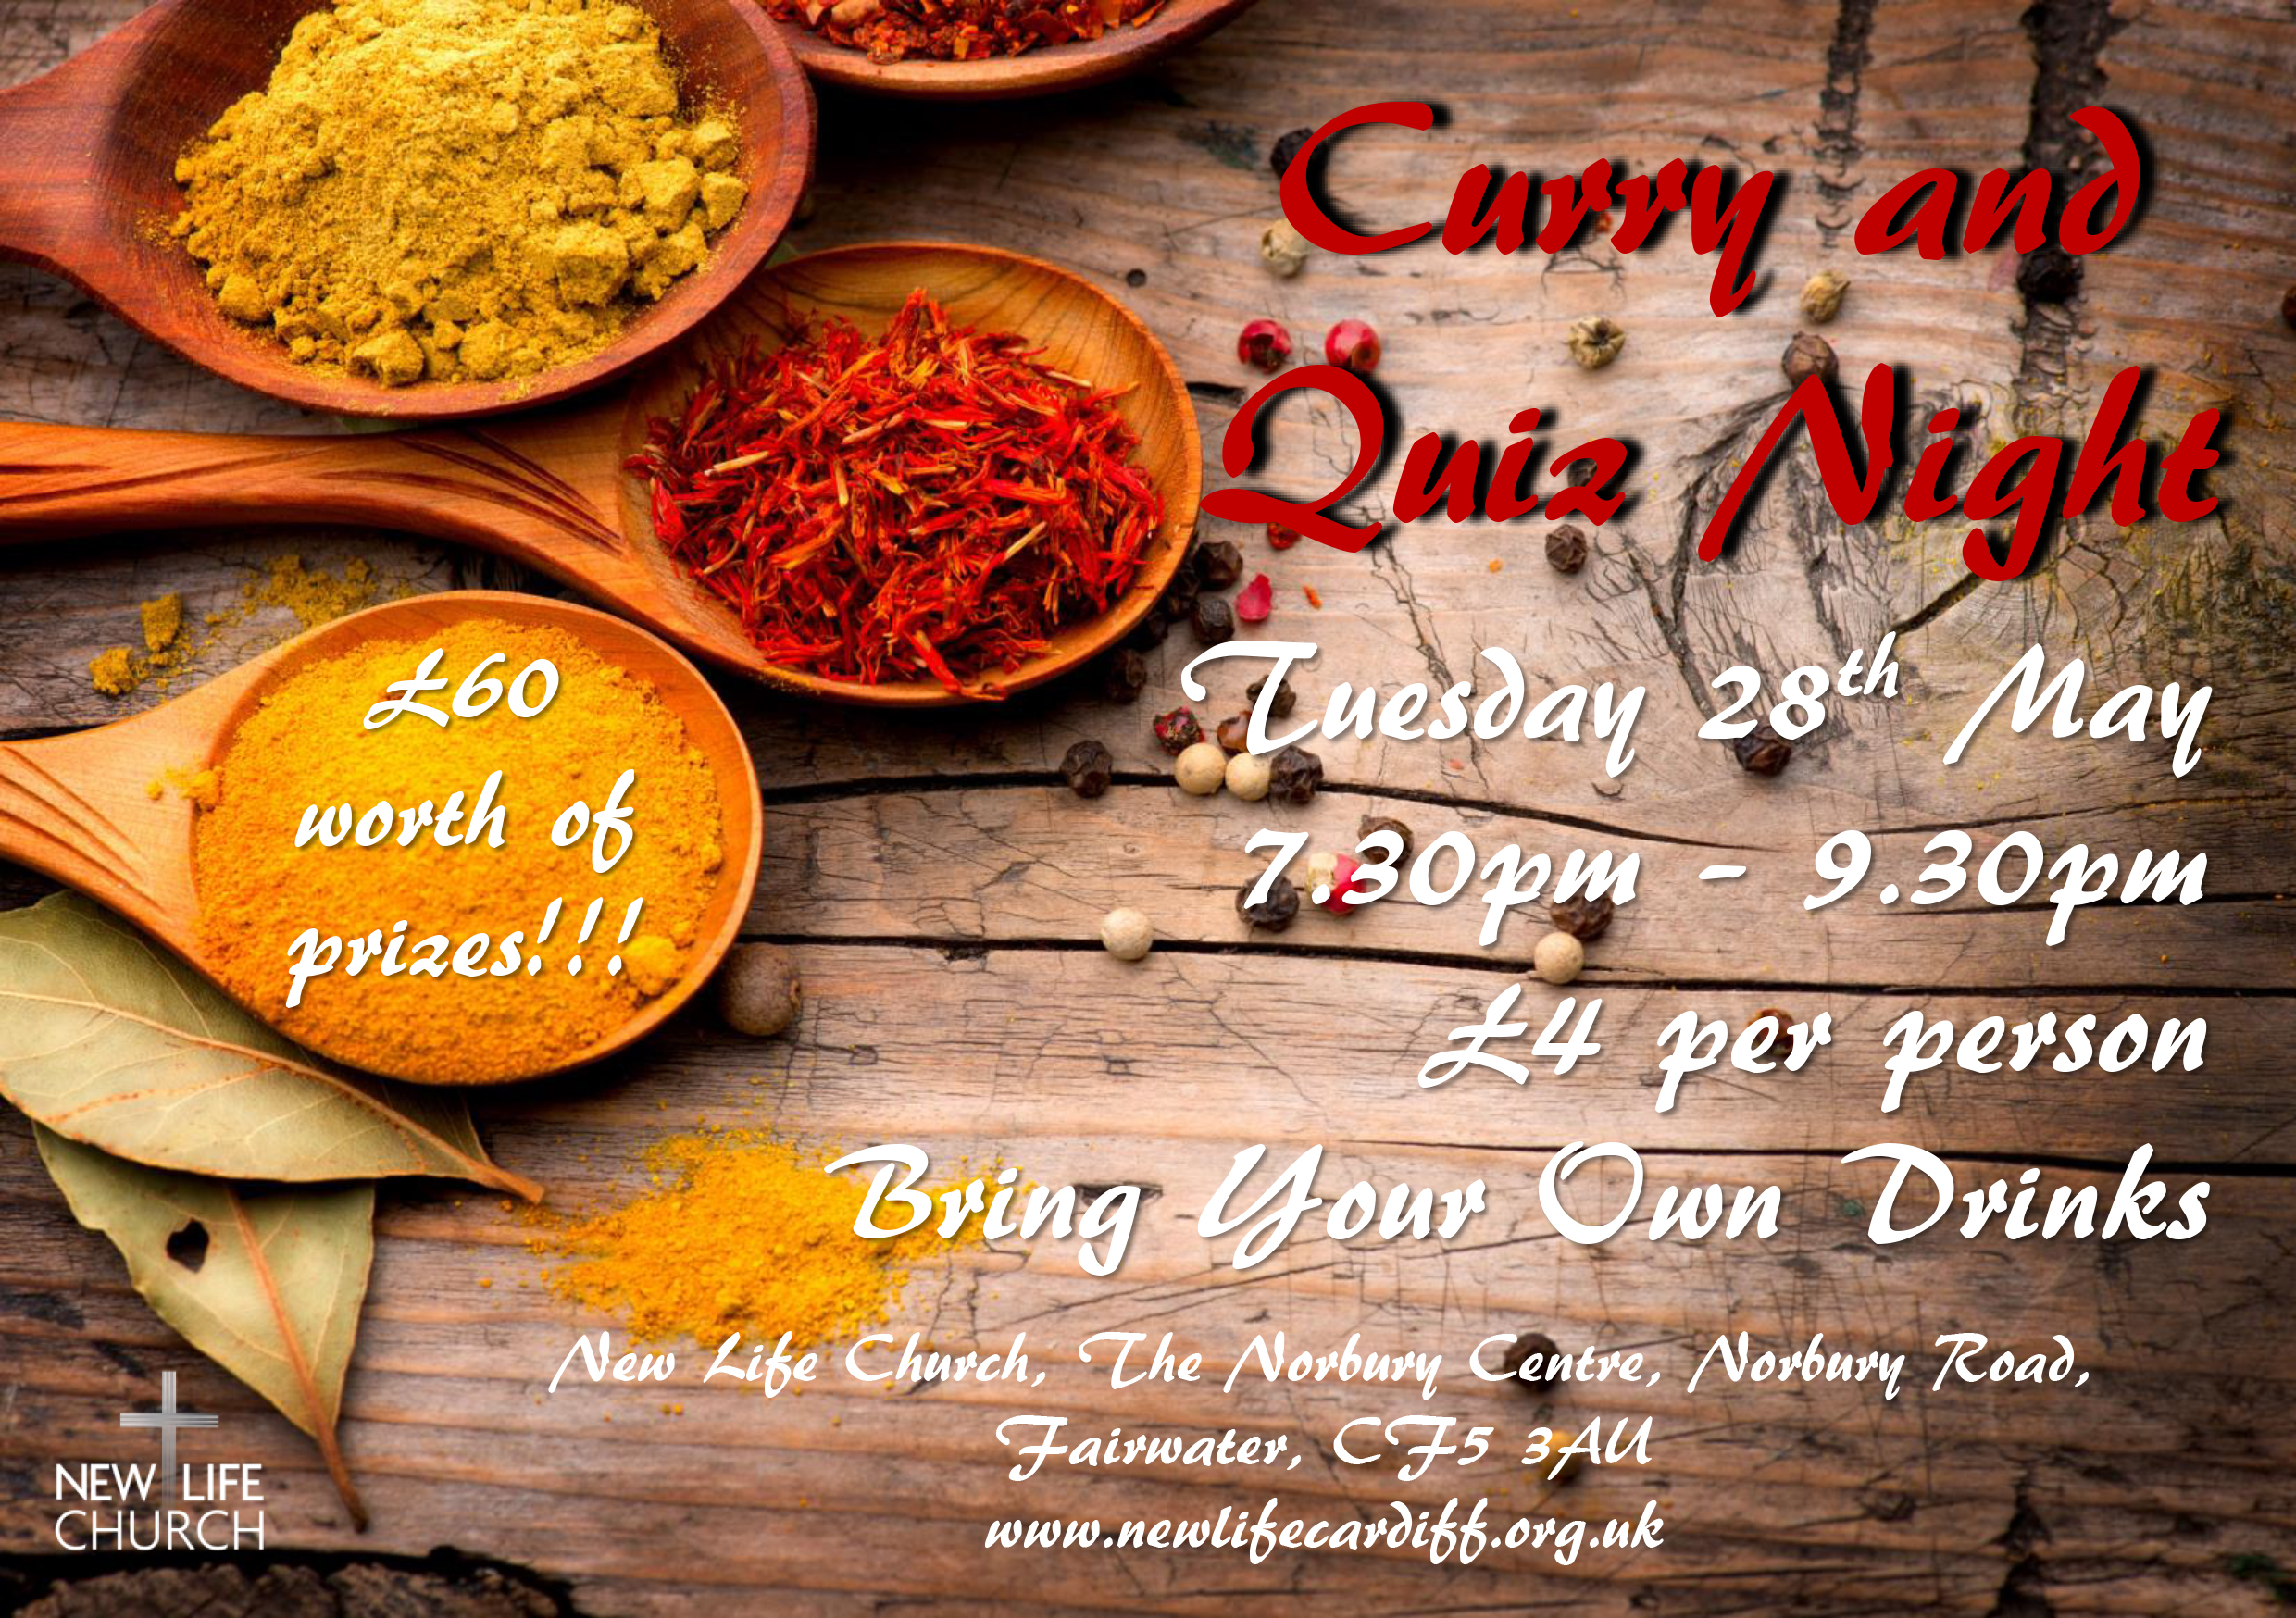 Curry and Quiz Night Flyer